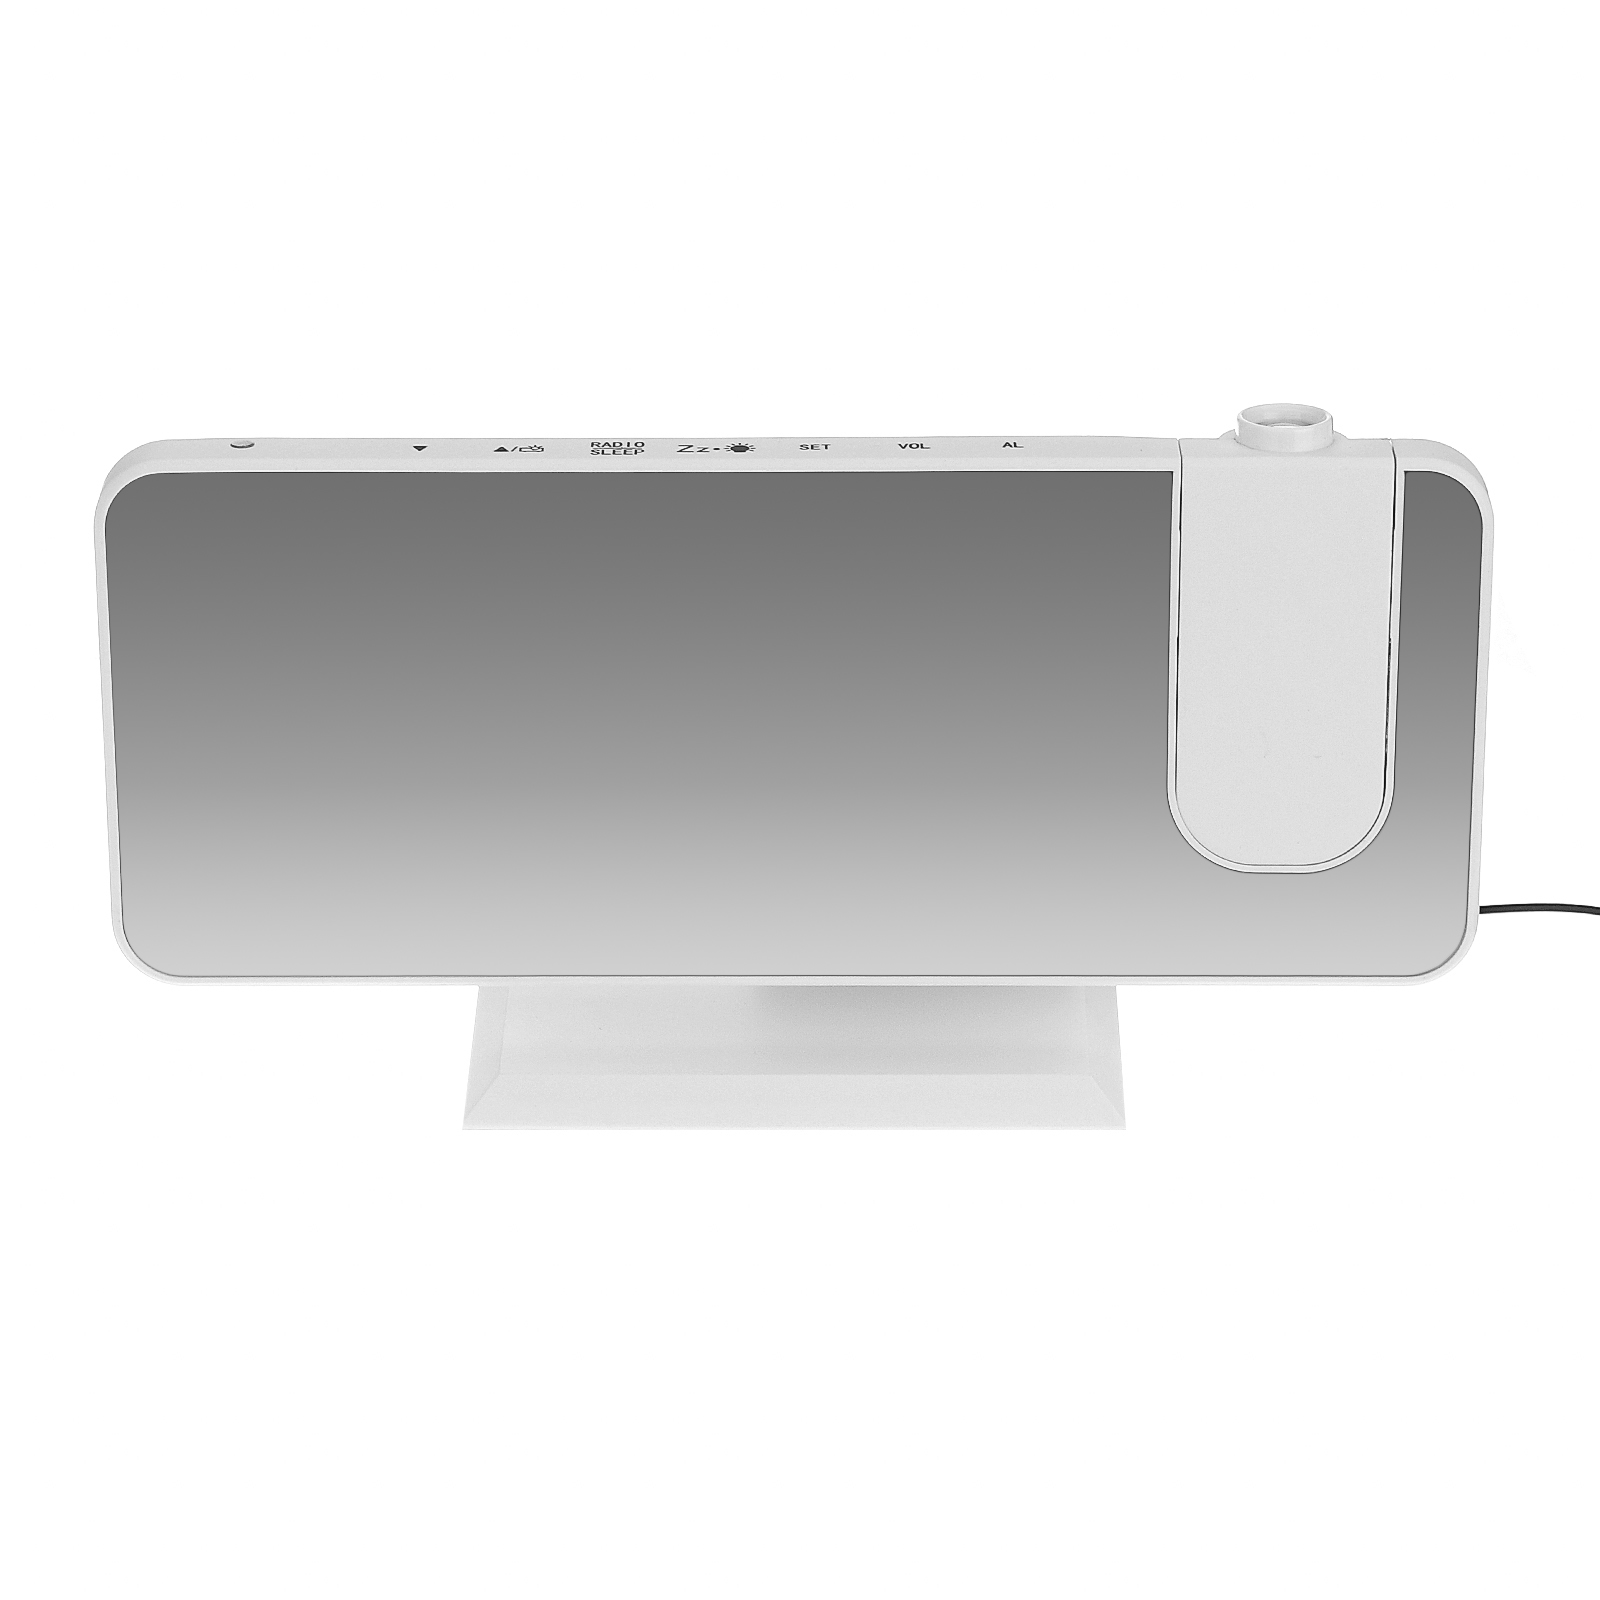 LED-Mirror-Alarm-Clock-Big-Screen-Temperature-and-Humidity-Display-with-Radio-and-Time-Projection-Fu-1751898-9